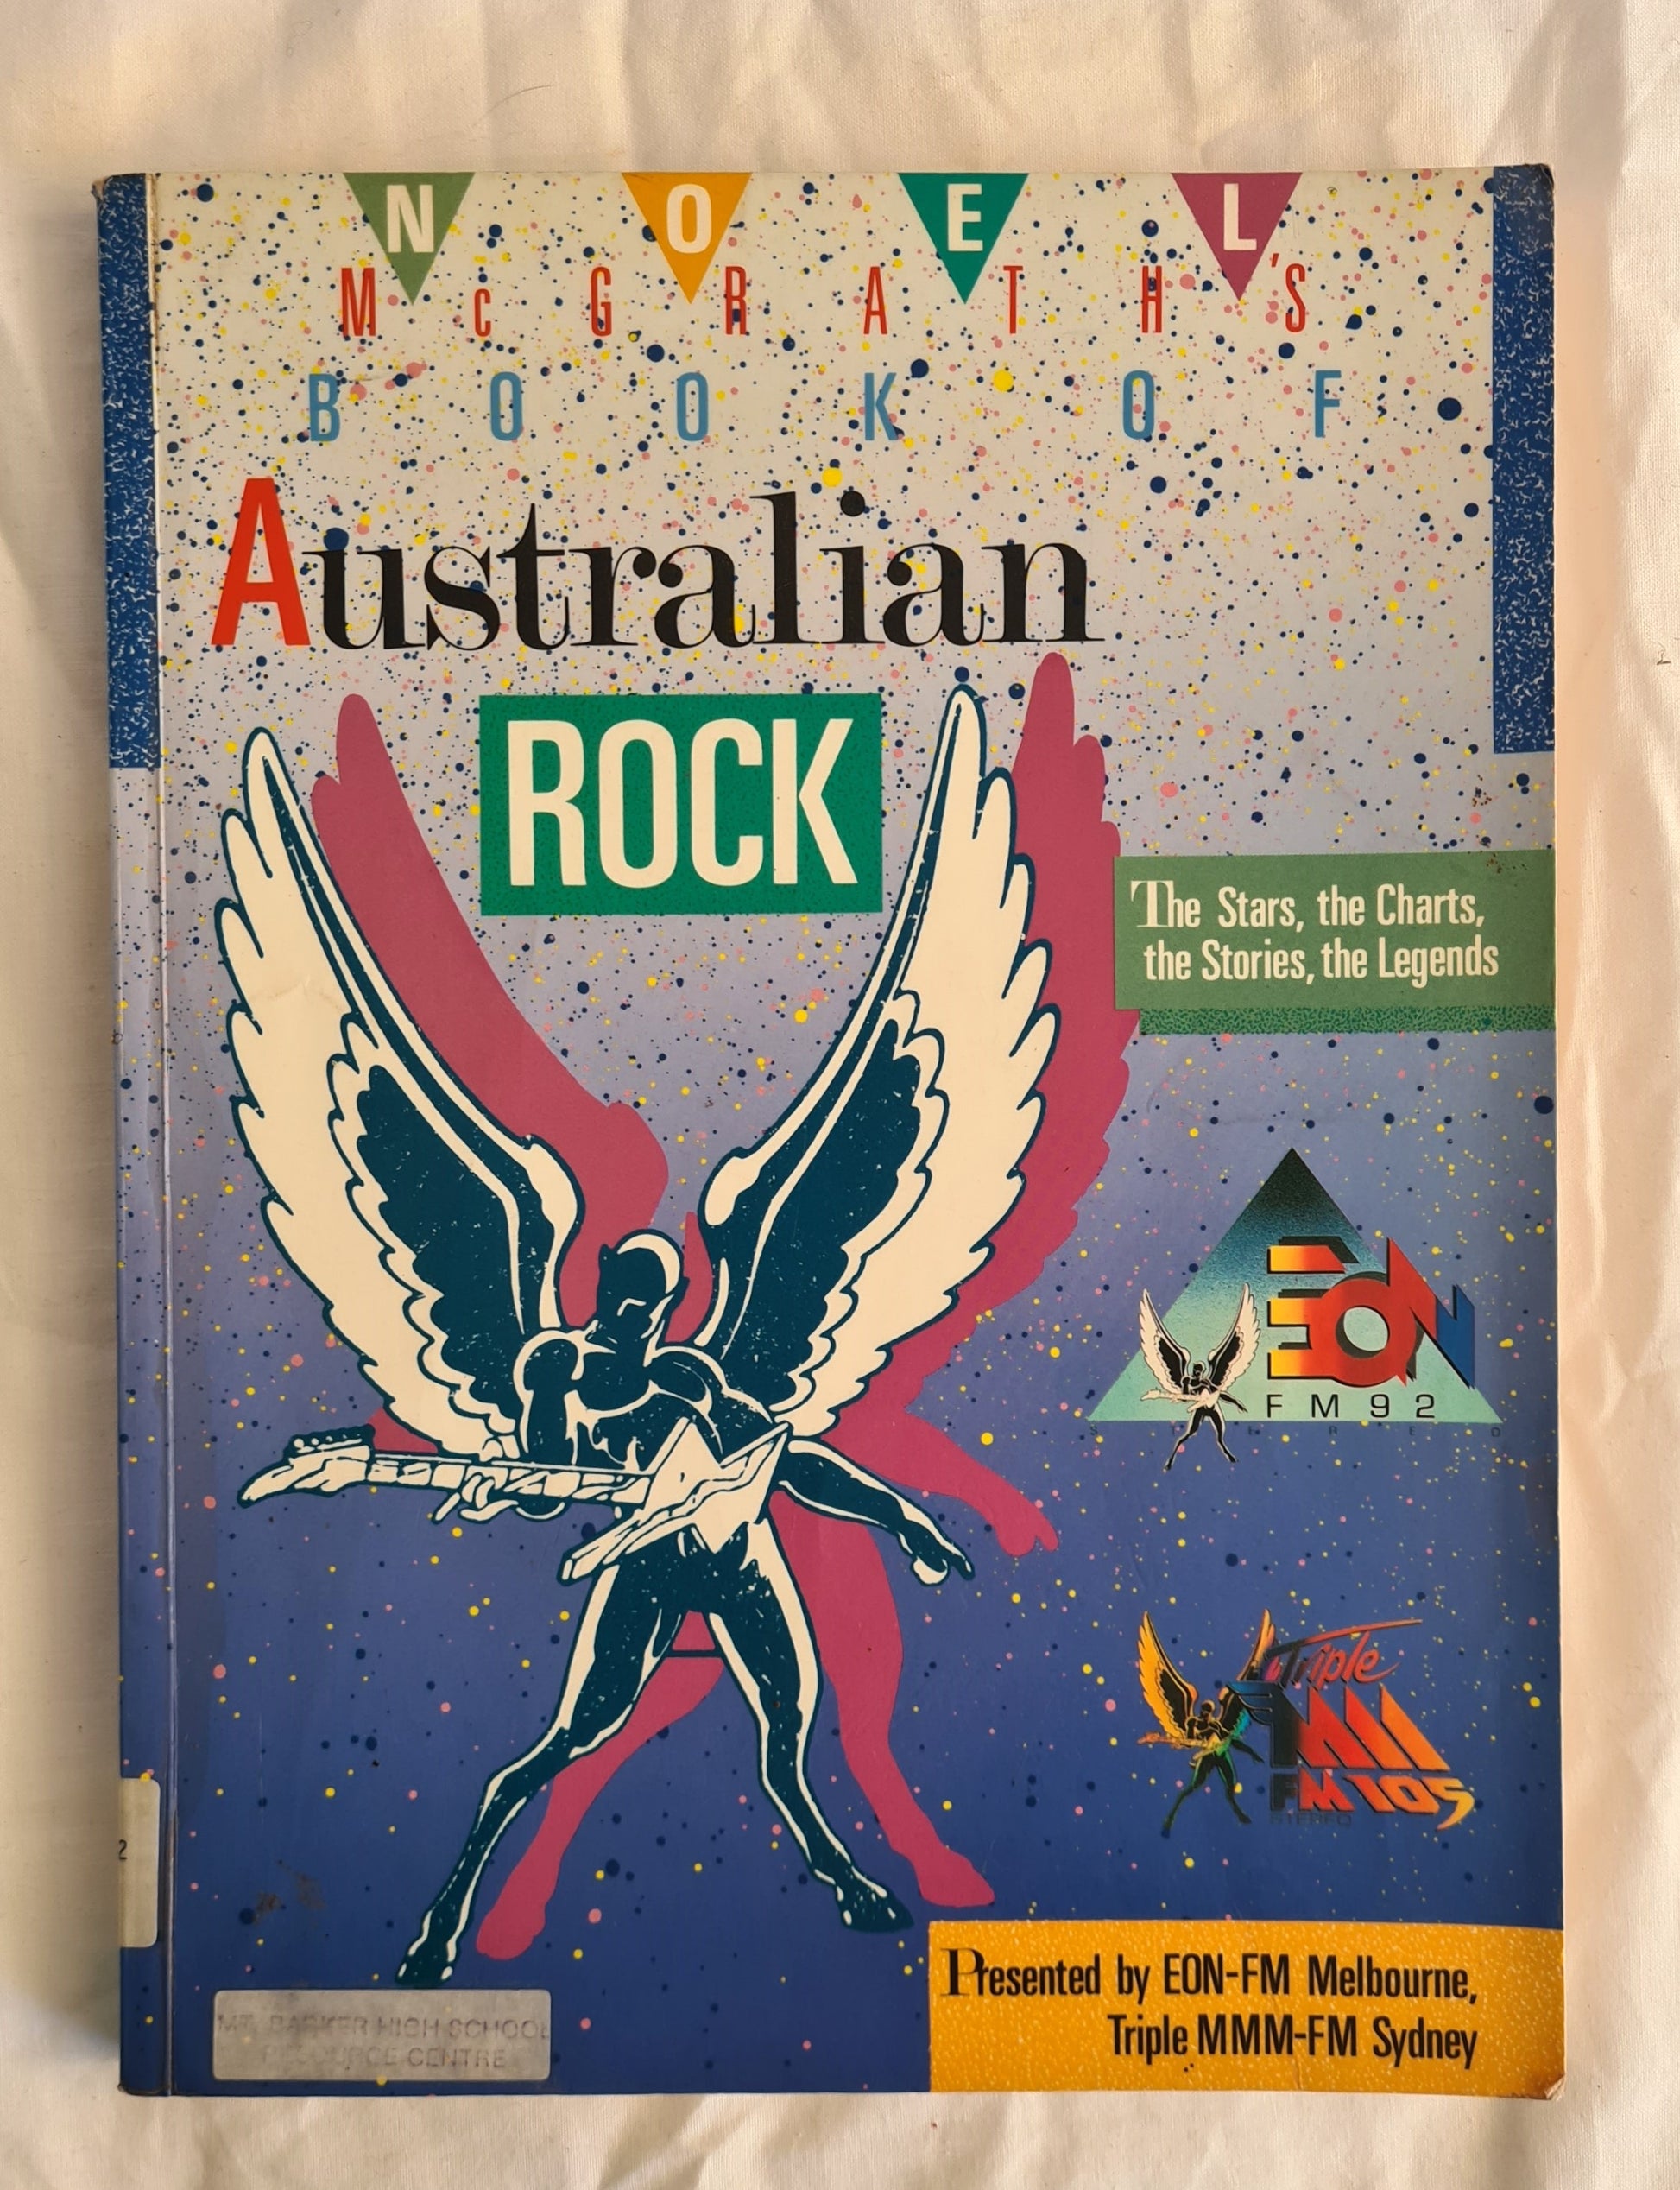 Noel McGrath’s Book of Australian Rock  The Stars, the Charts, the Stories, the Legends  by Noel McGrath